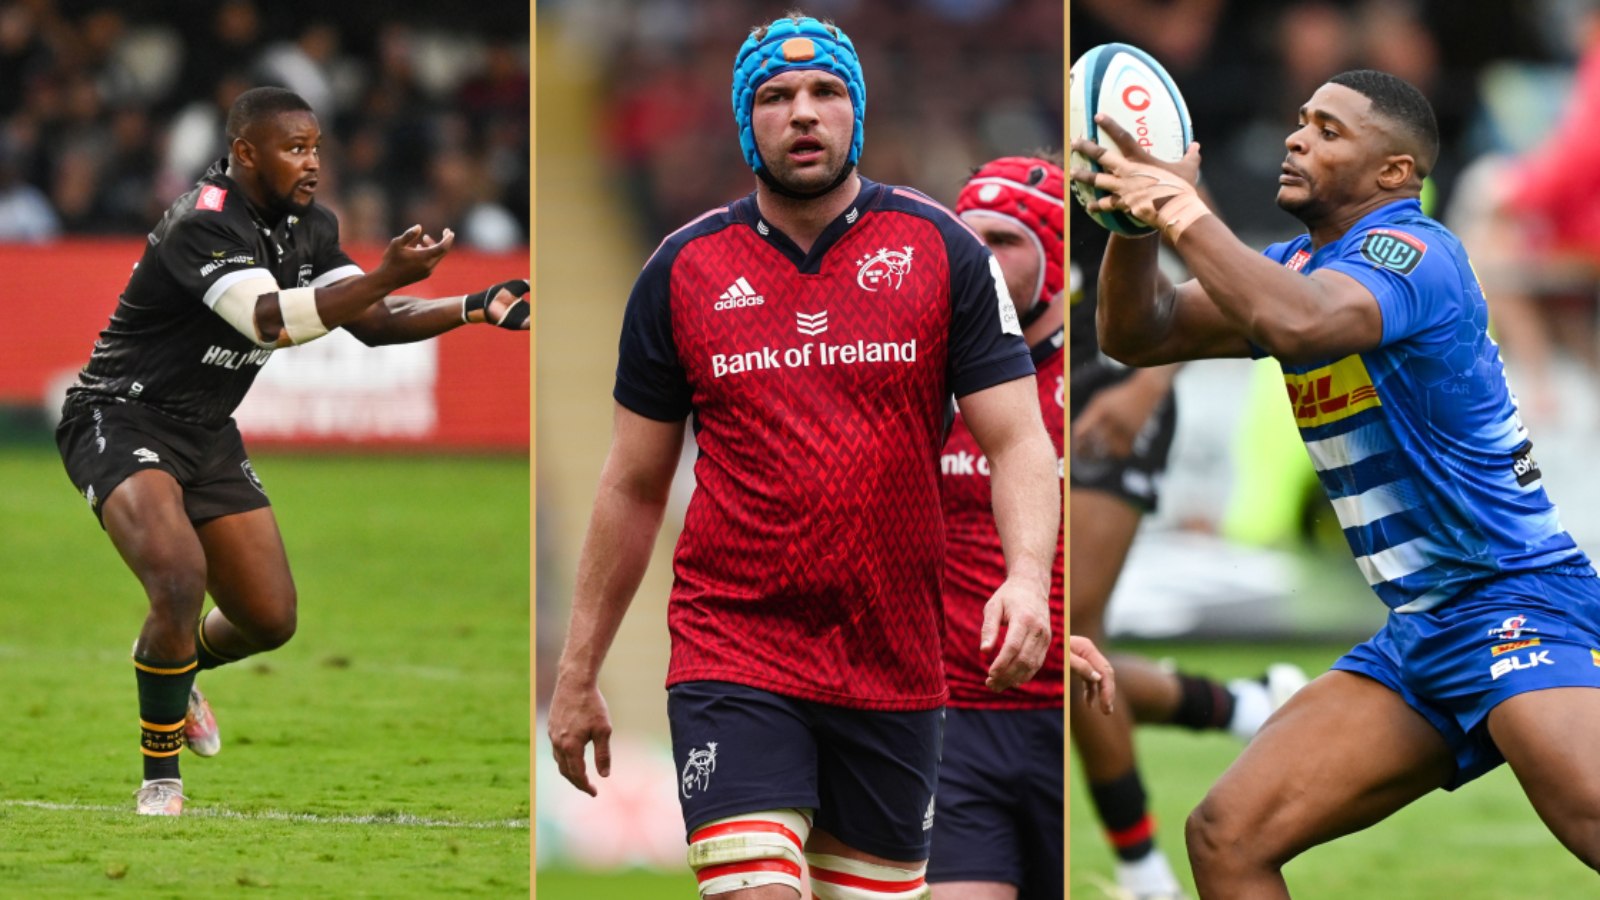 united rugby championship team of the week: ‘the boogeyman’ returns while munster forwards hit high numbers